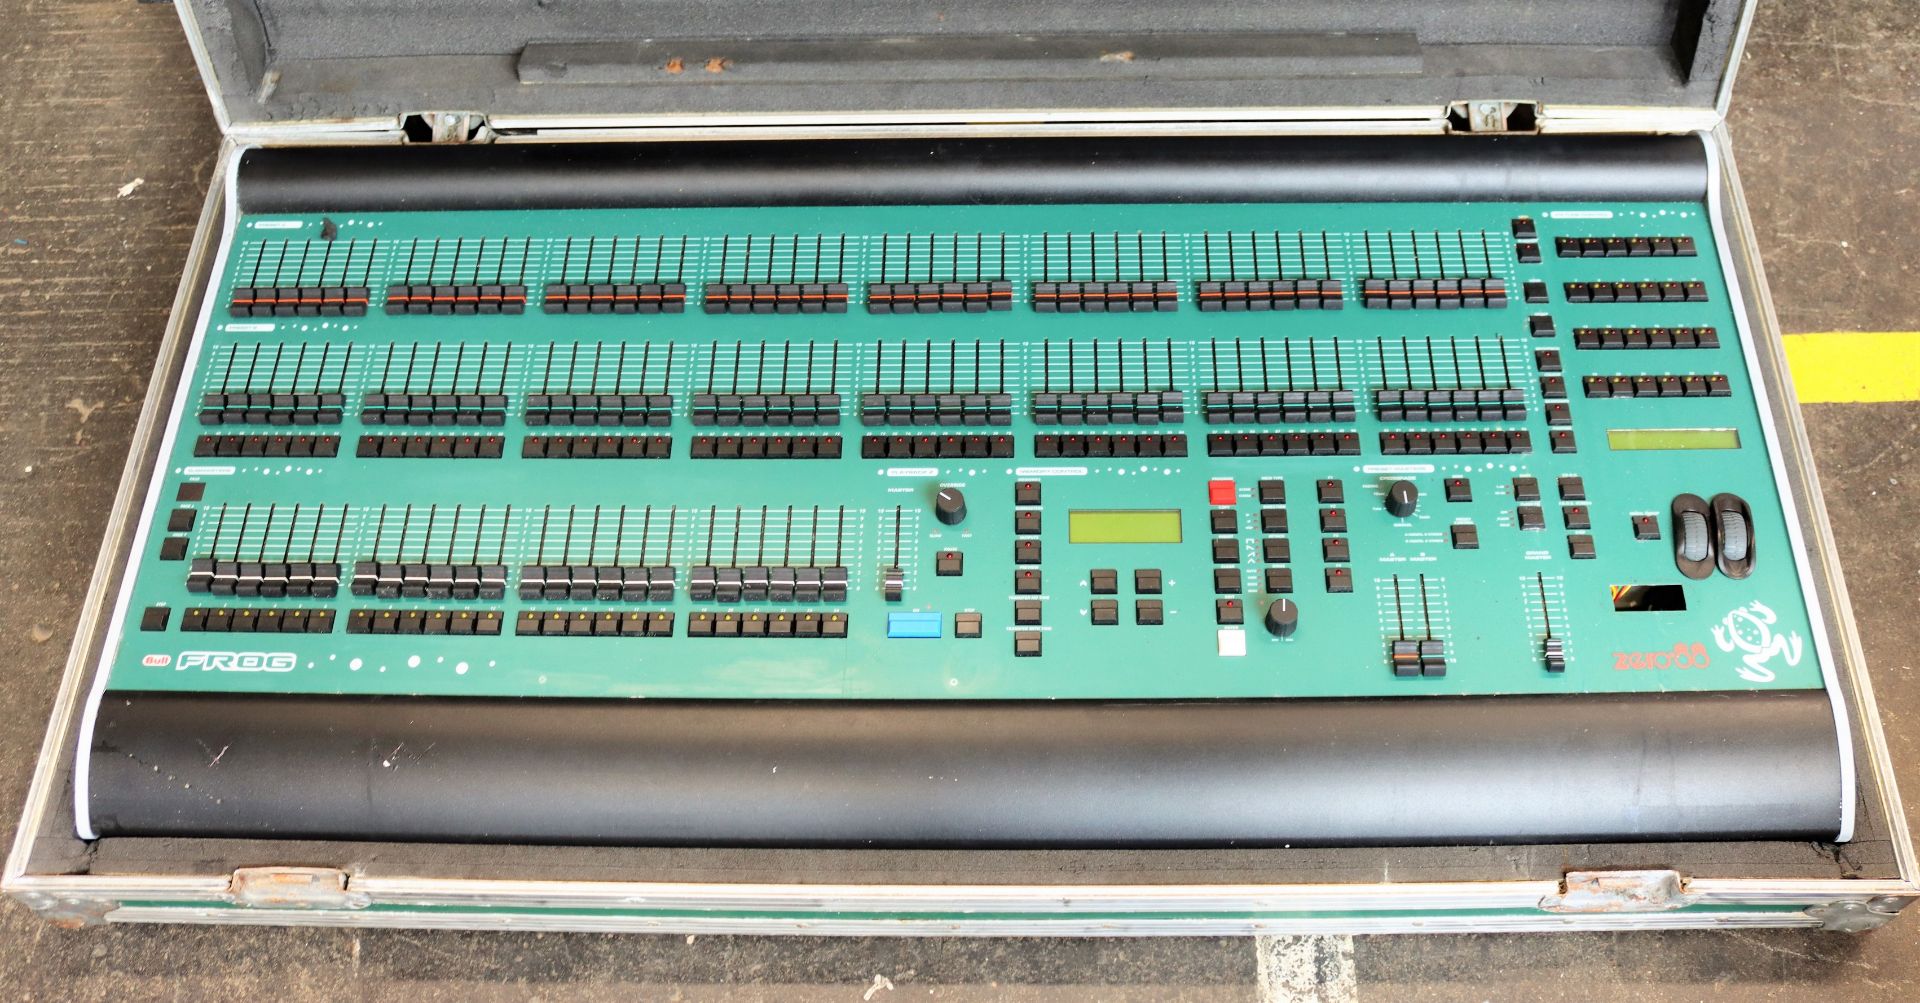 A pre-owned Bullfrog Zero-88 Lighting Desk in flight case (Damaged, untested. Sold as seen).